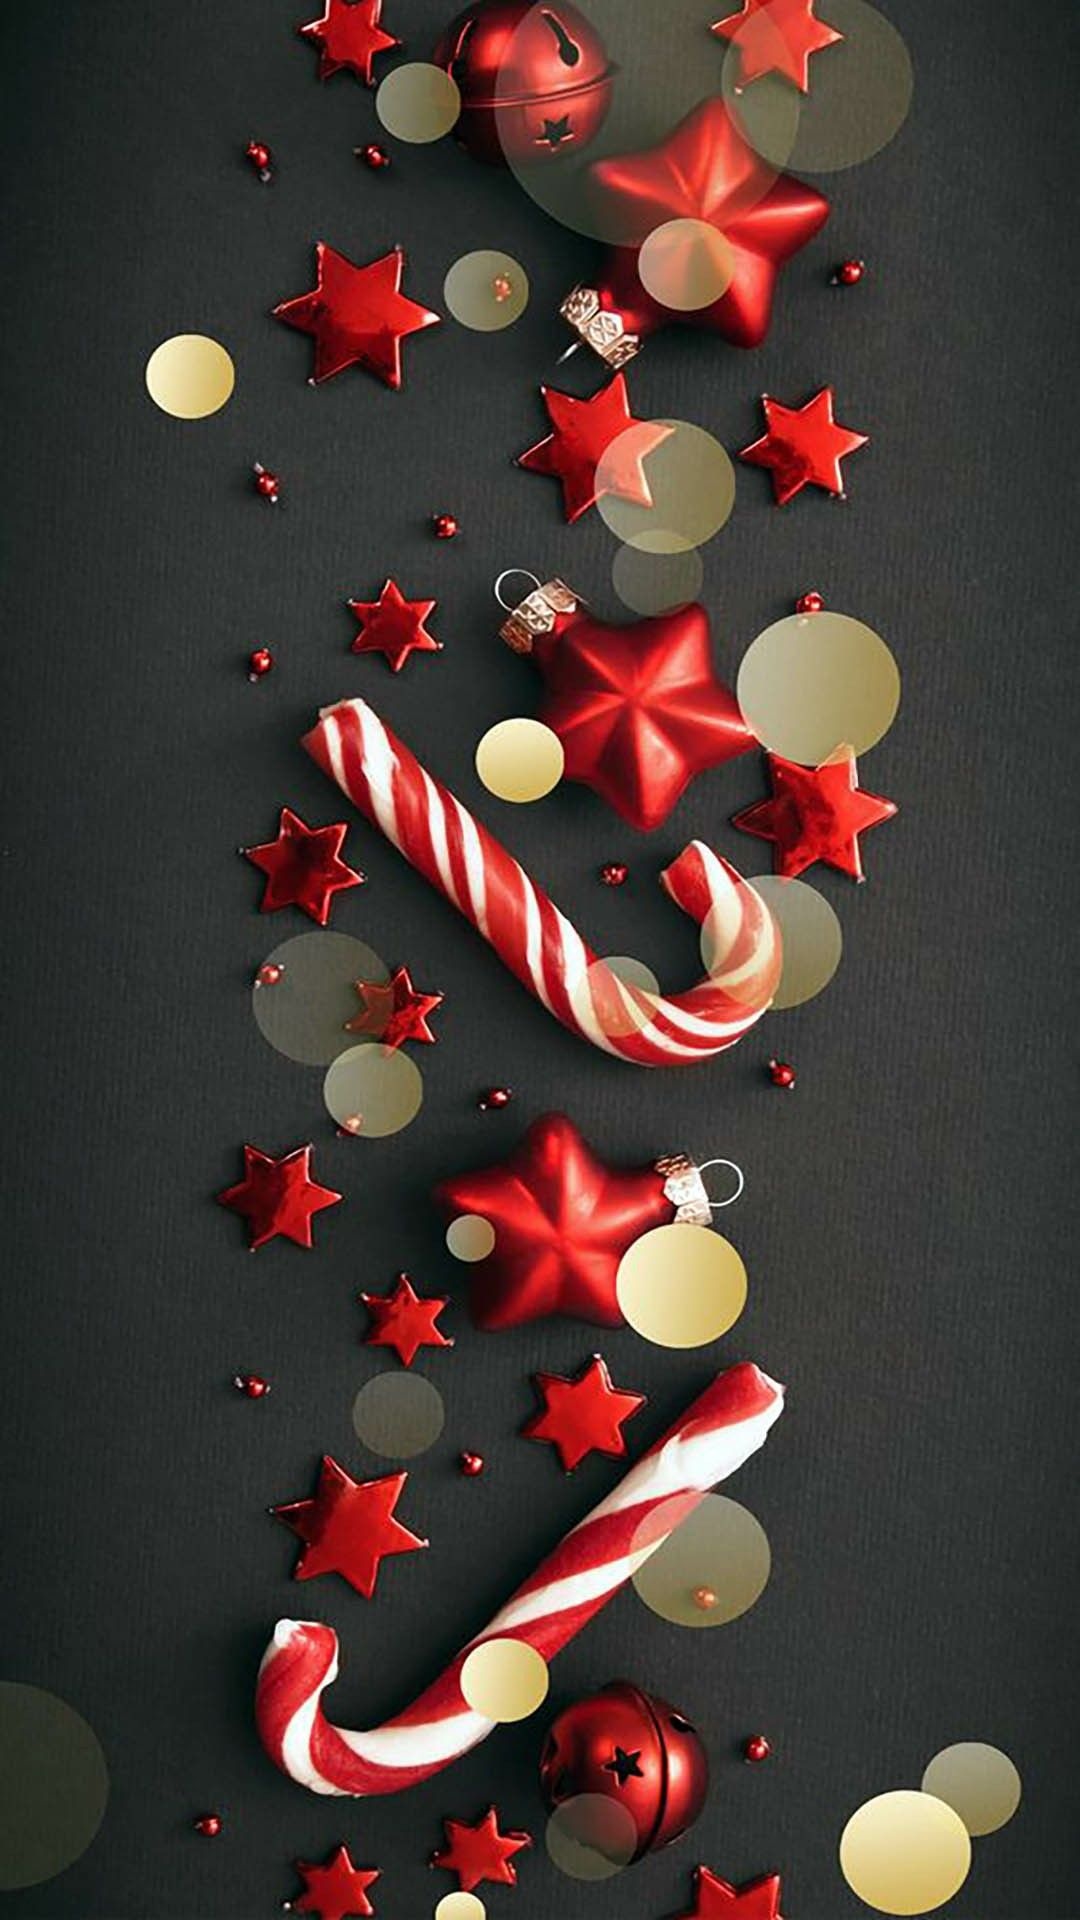 Red and white swirls, Christmas treat, Yummy delight, Festive flavor, 1080x1920 Full HD Handy